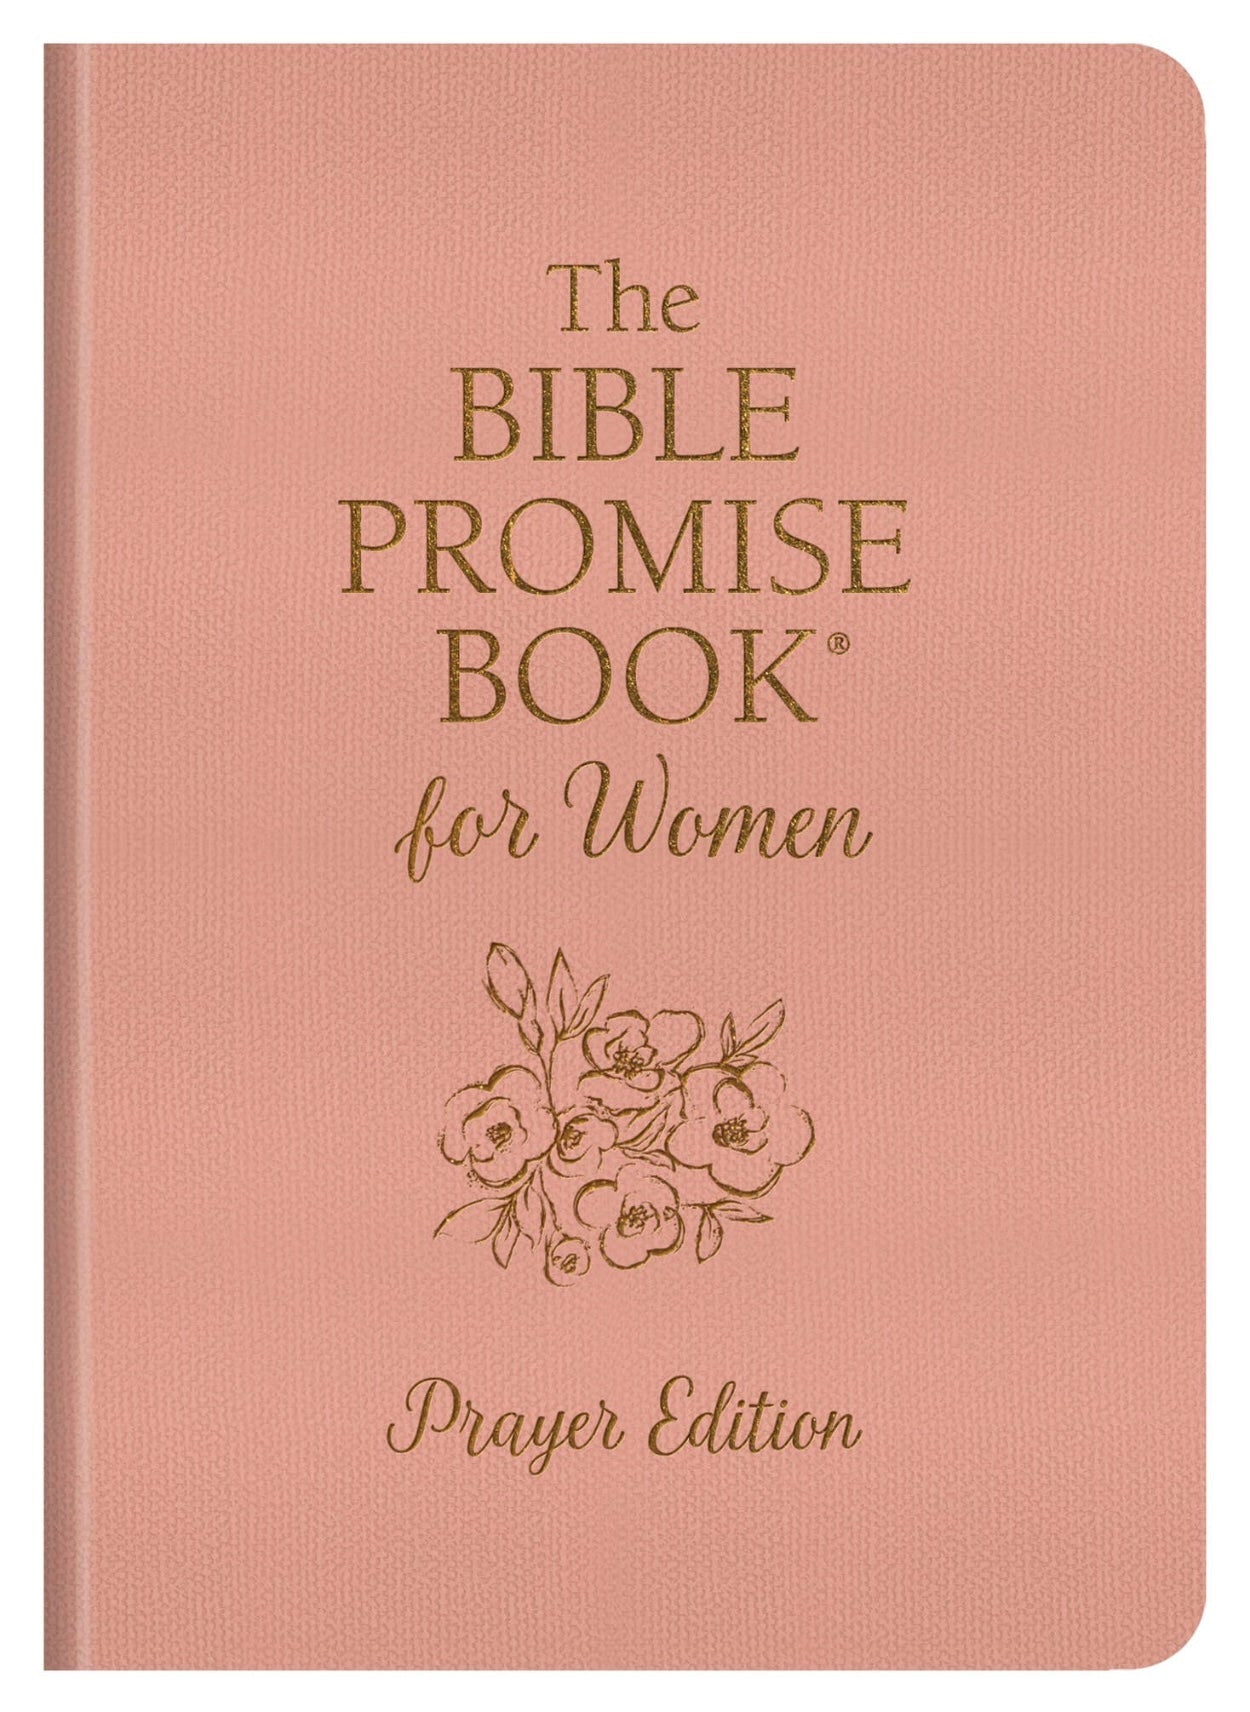 The Bible Promise Book for Women: Prayer Edition